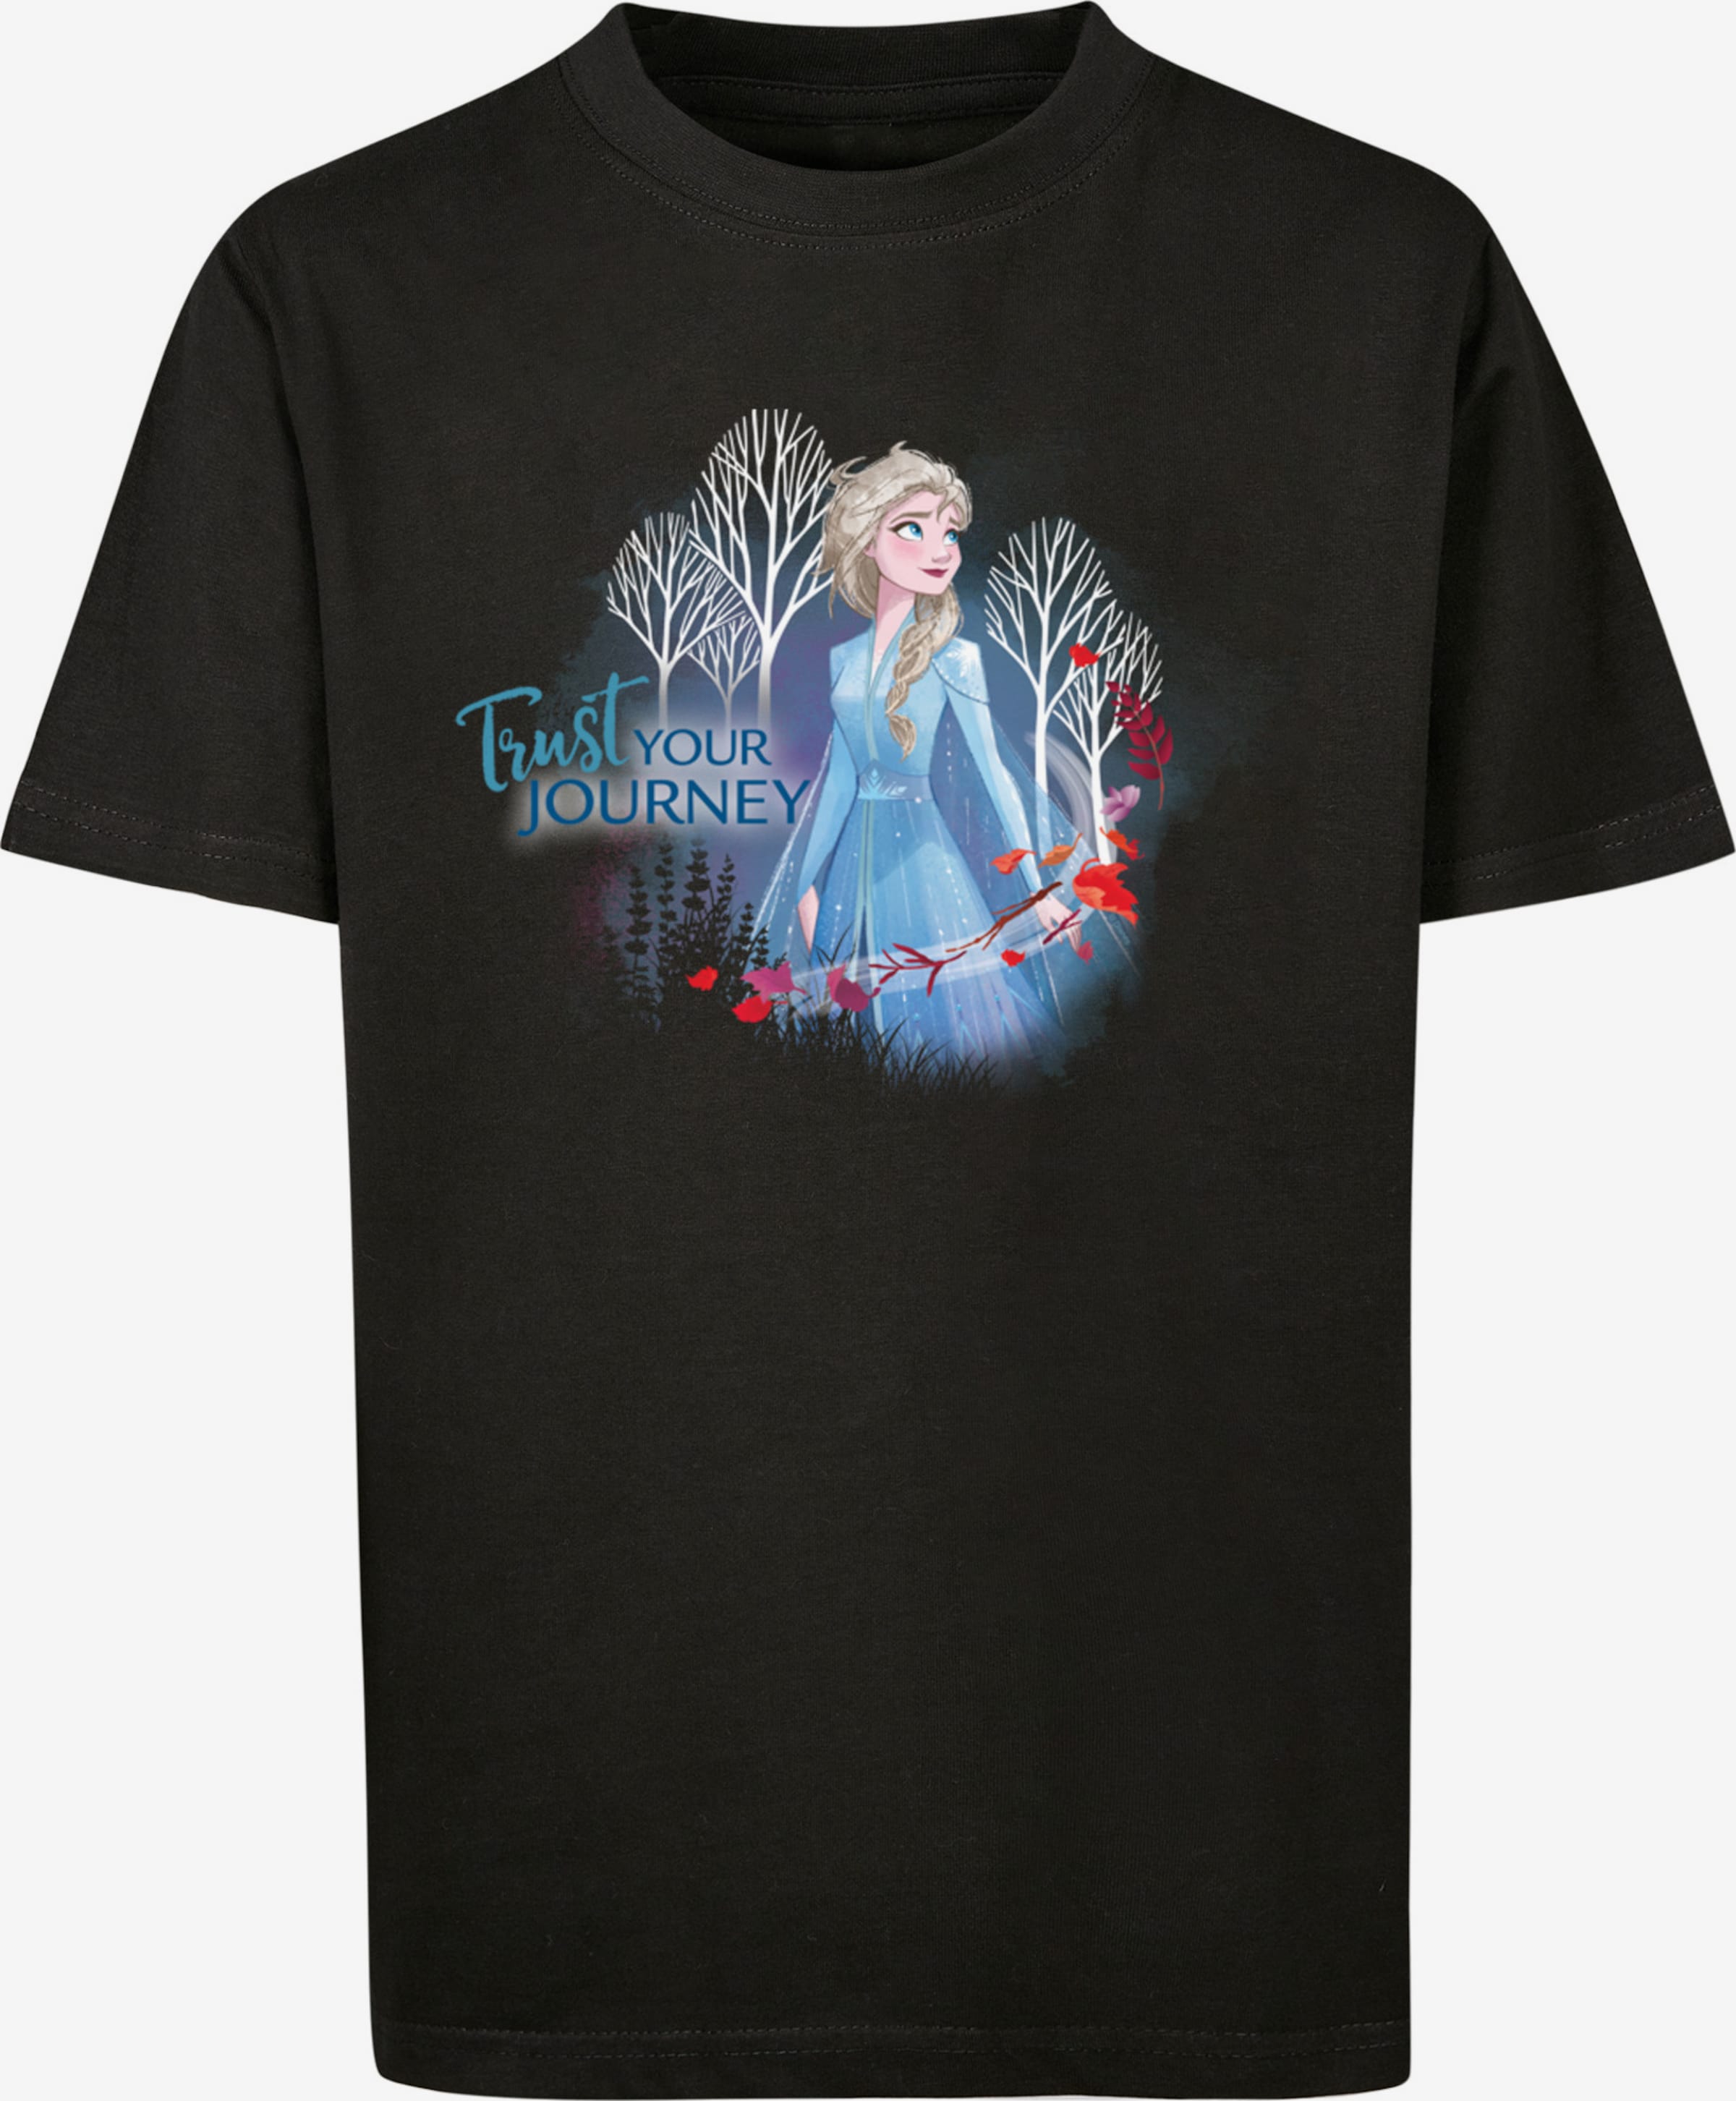 Trust | Journey\' Shirt 2 in ABOUT F4NT4STIC YOU Your Black \'Disney Frozen